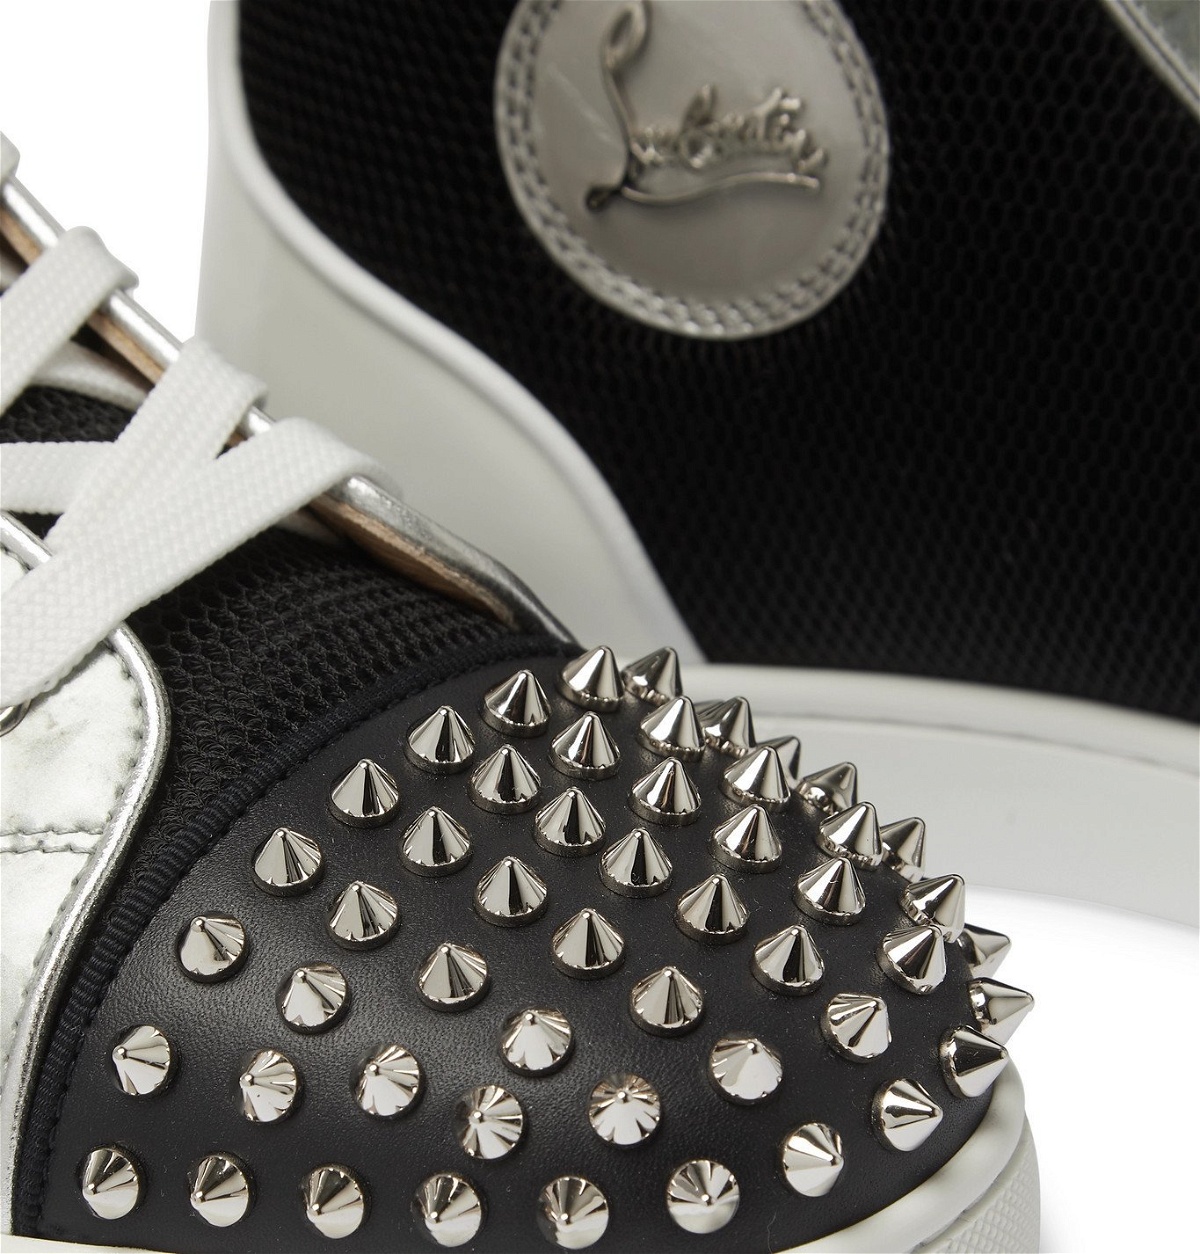 Christian Louboutin Black Leather Louis Spikes High Top Sneakers